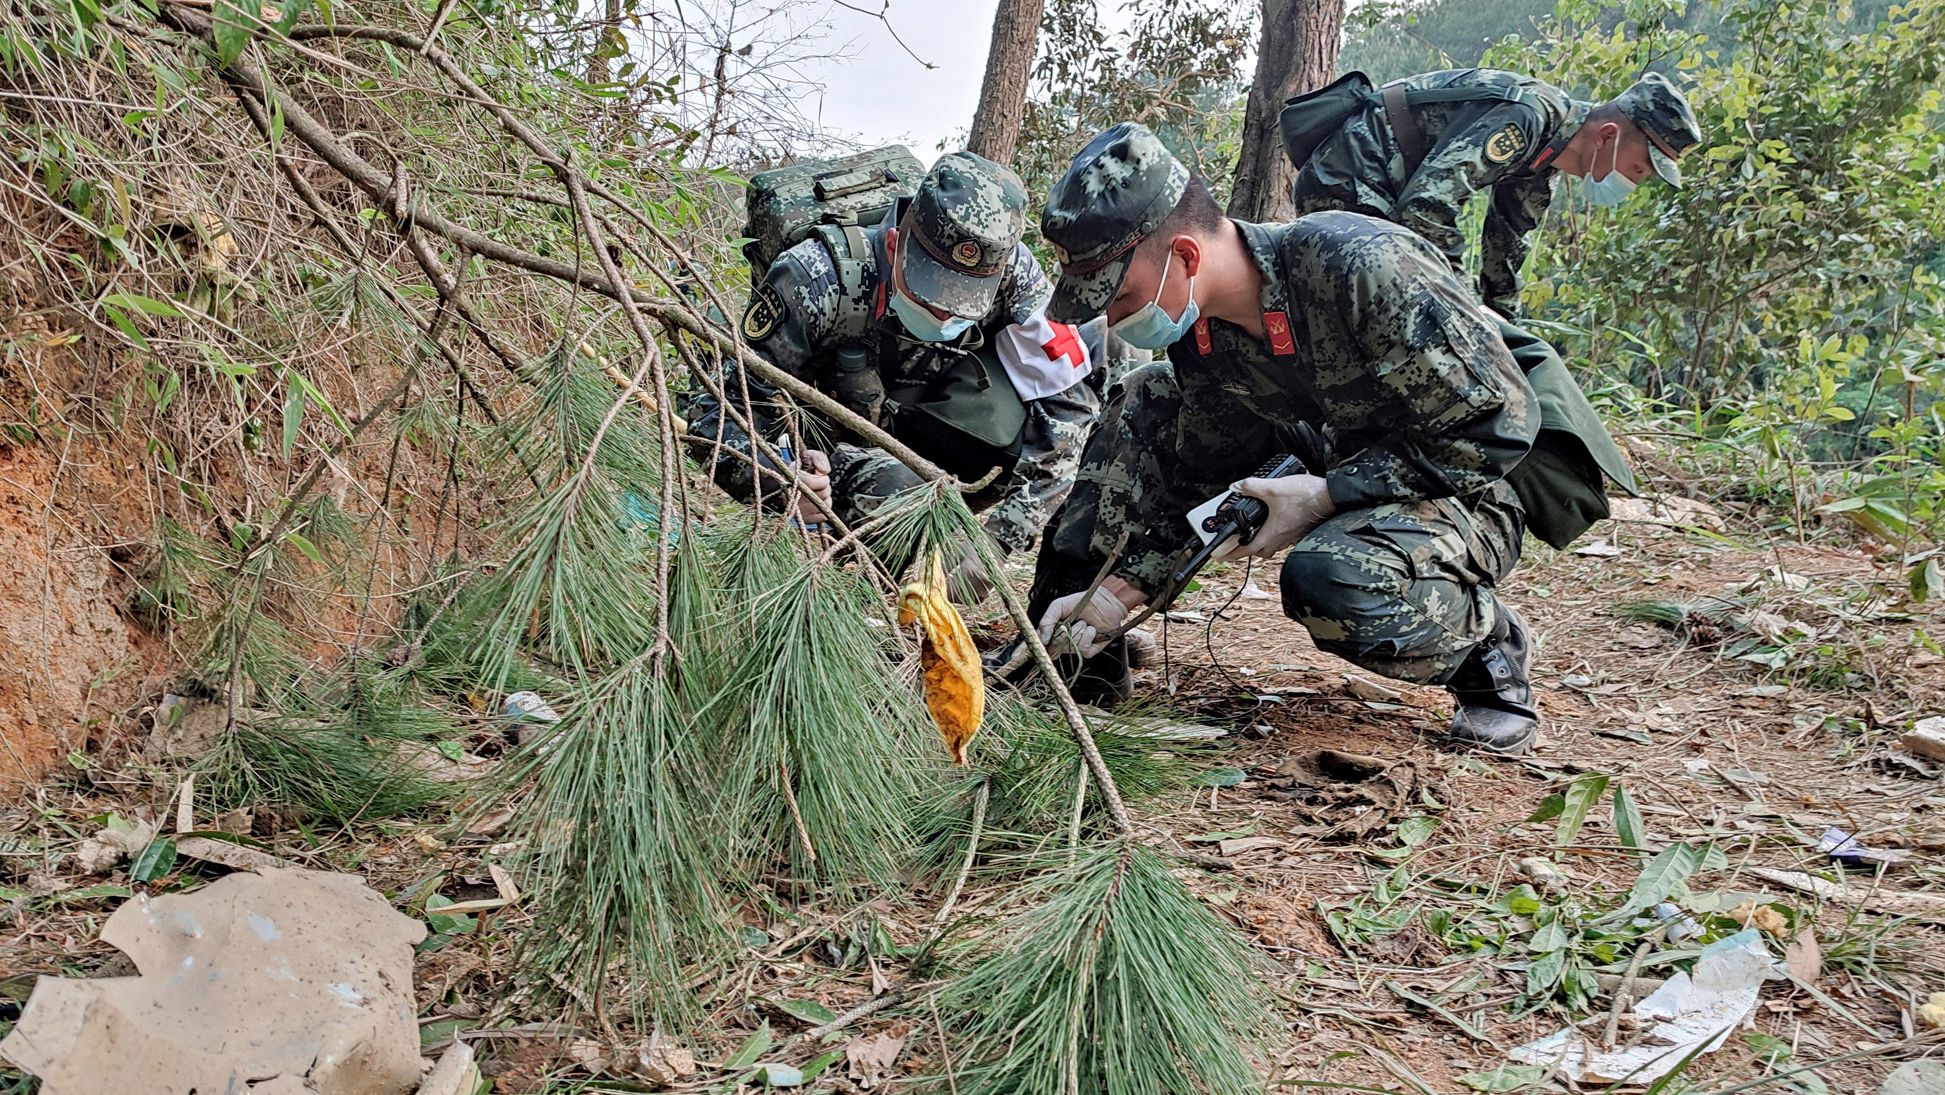 Paramilitary police officers search the site of the China Eastern Airlines plane crash in China's Guangxi province on March 22.